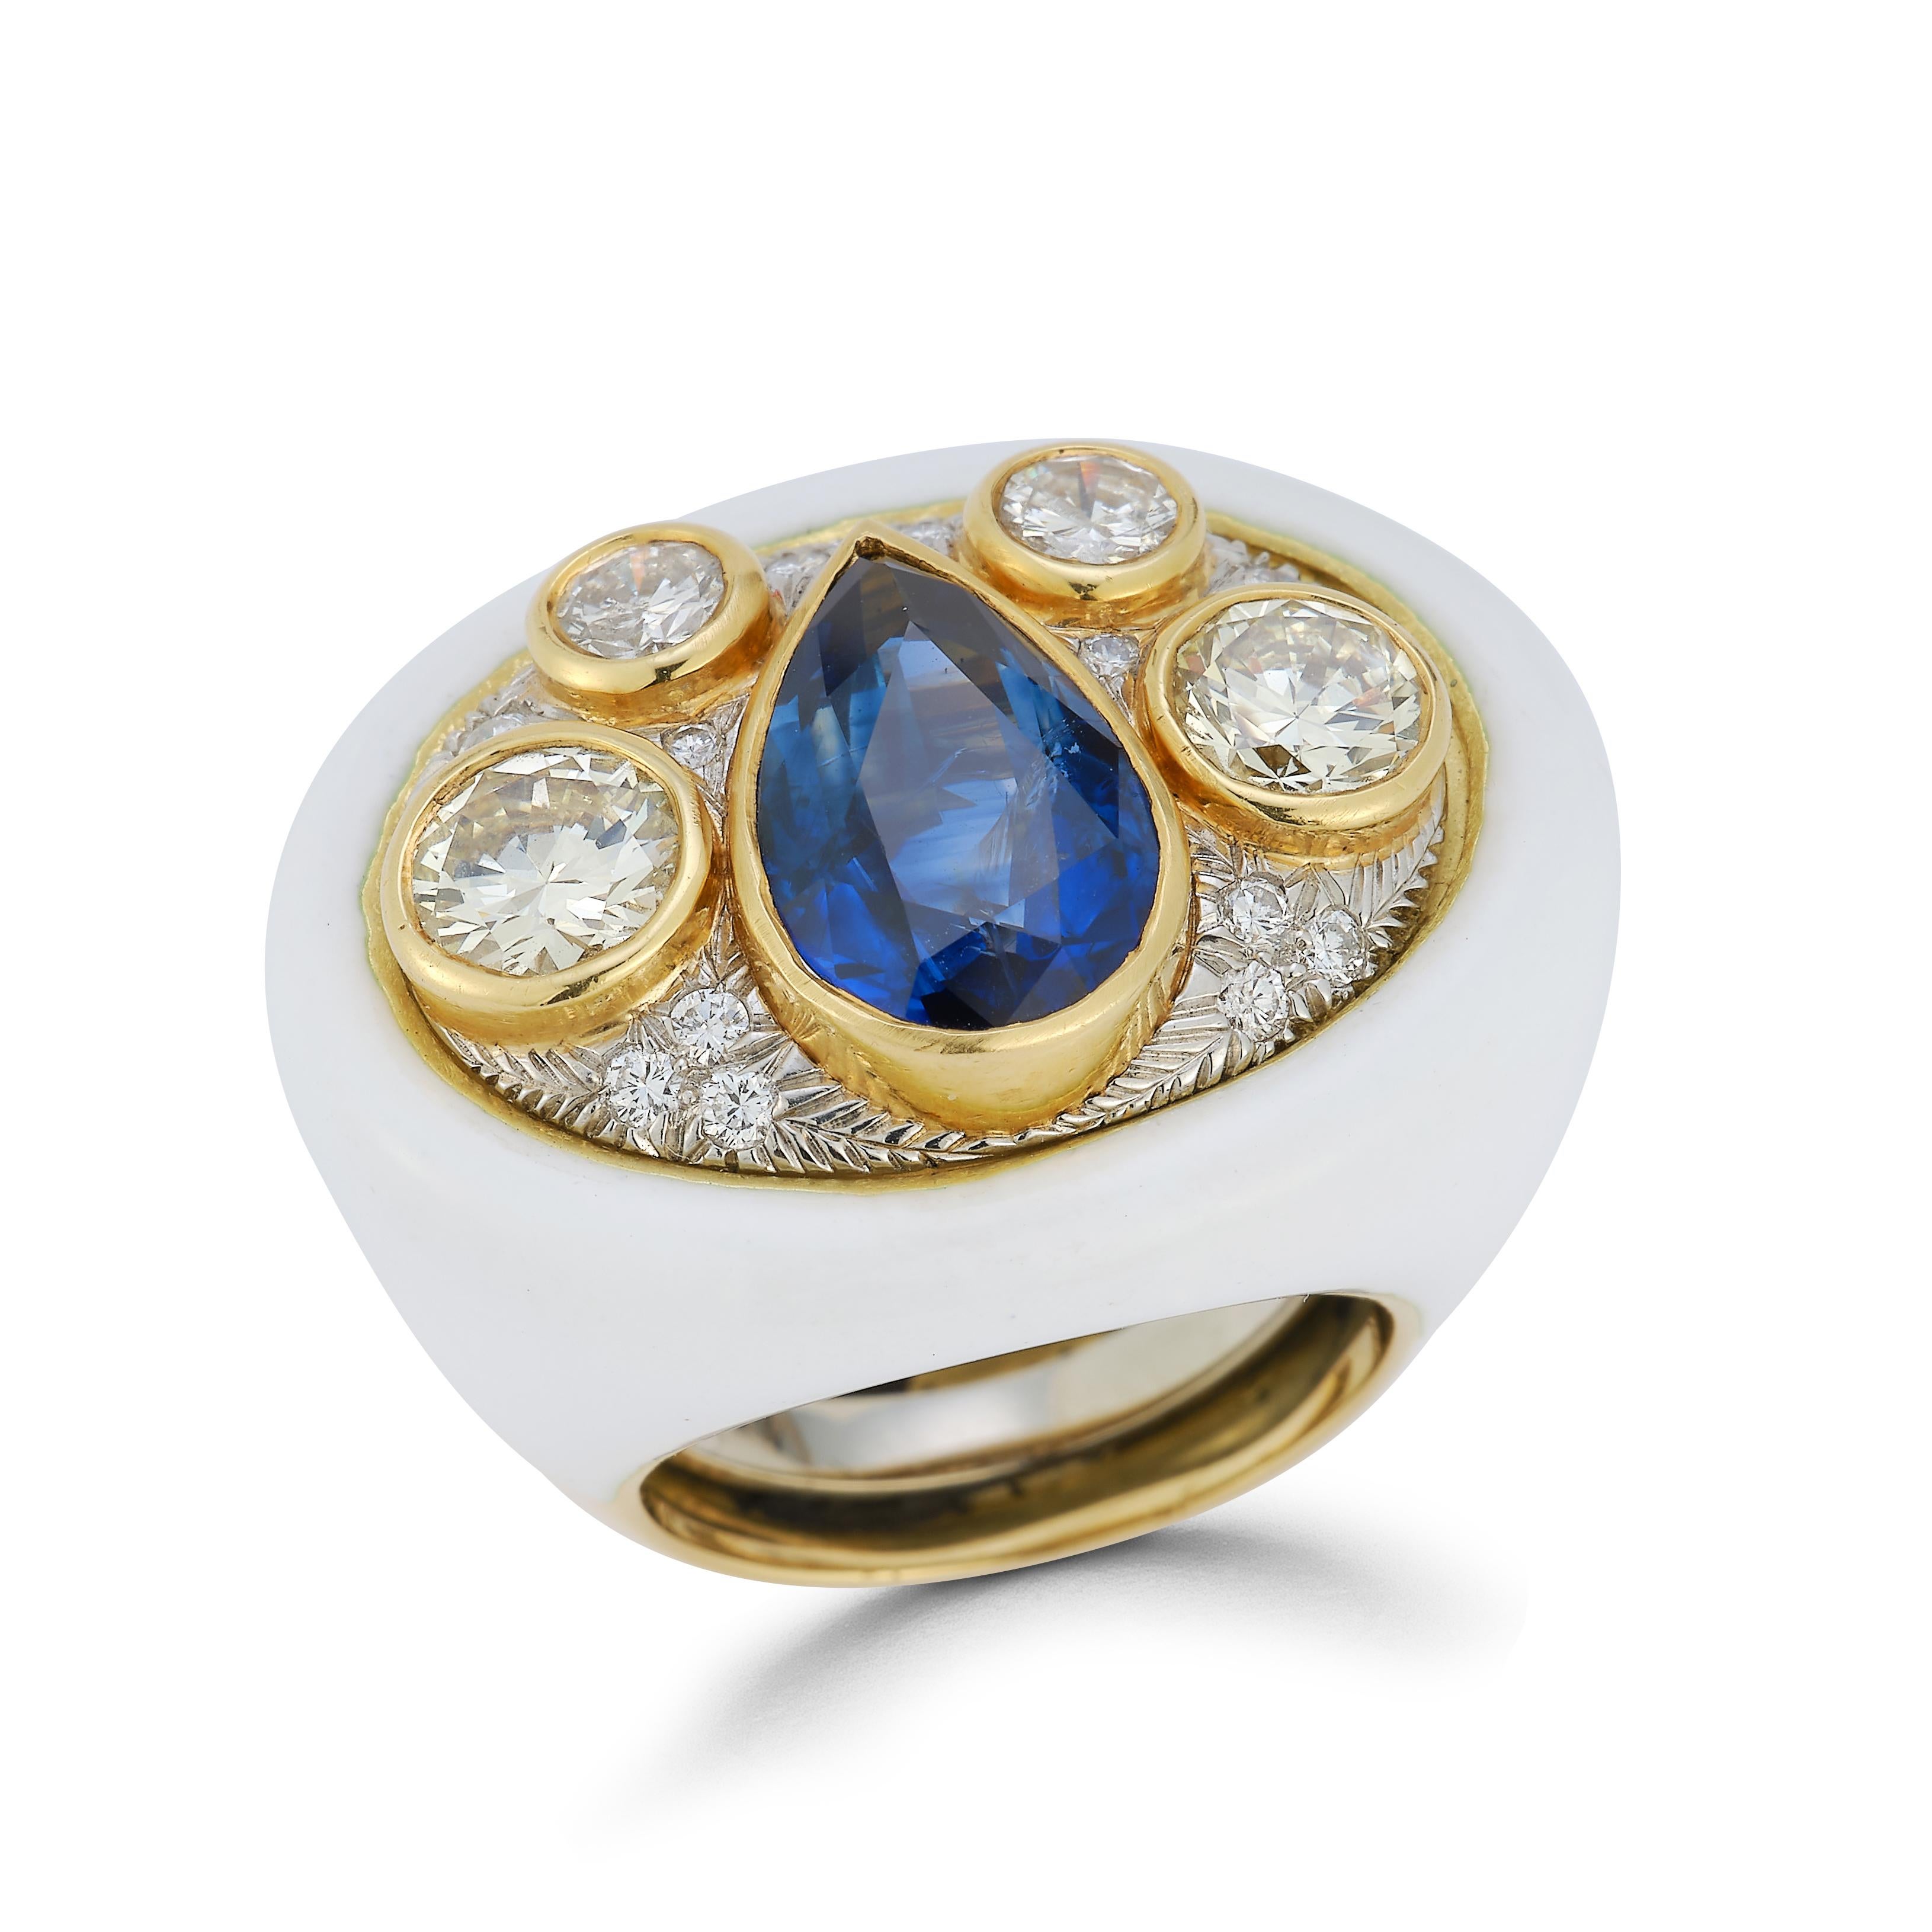 Sapphire Diamond and White Enamel Ring by Andrew Clunn

Pear Shape sapphire weight approx 4.02 ct
Diamonds weigh approx 1.93 total

Center gem set panel is removable and may become a pendant brooch!

Mounted in Platinum and Gold 

Sizable to any